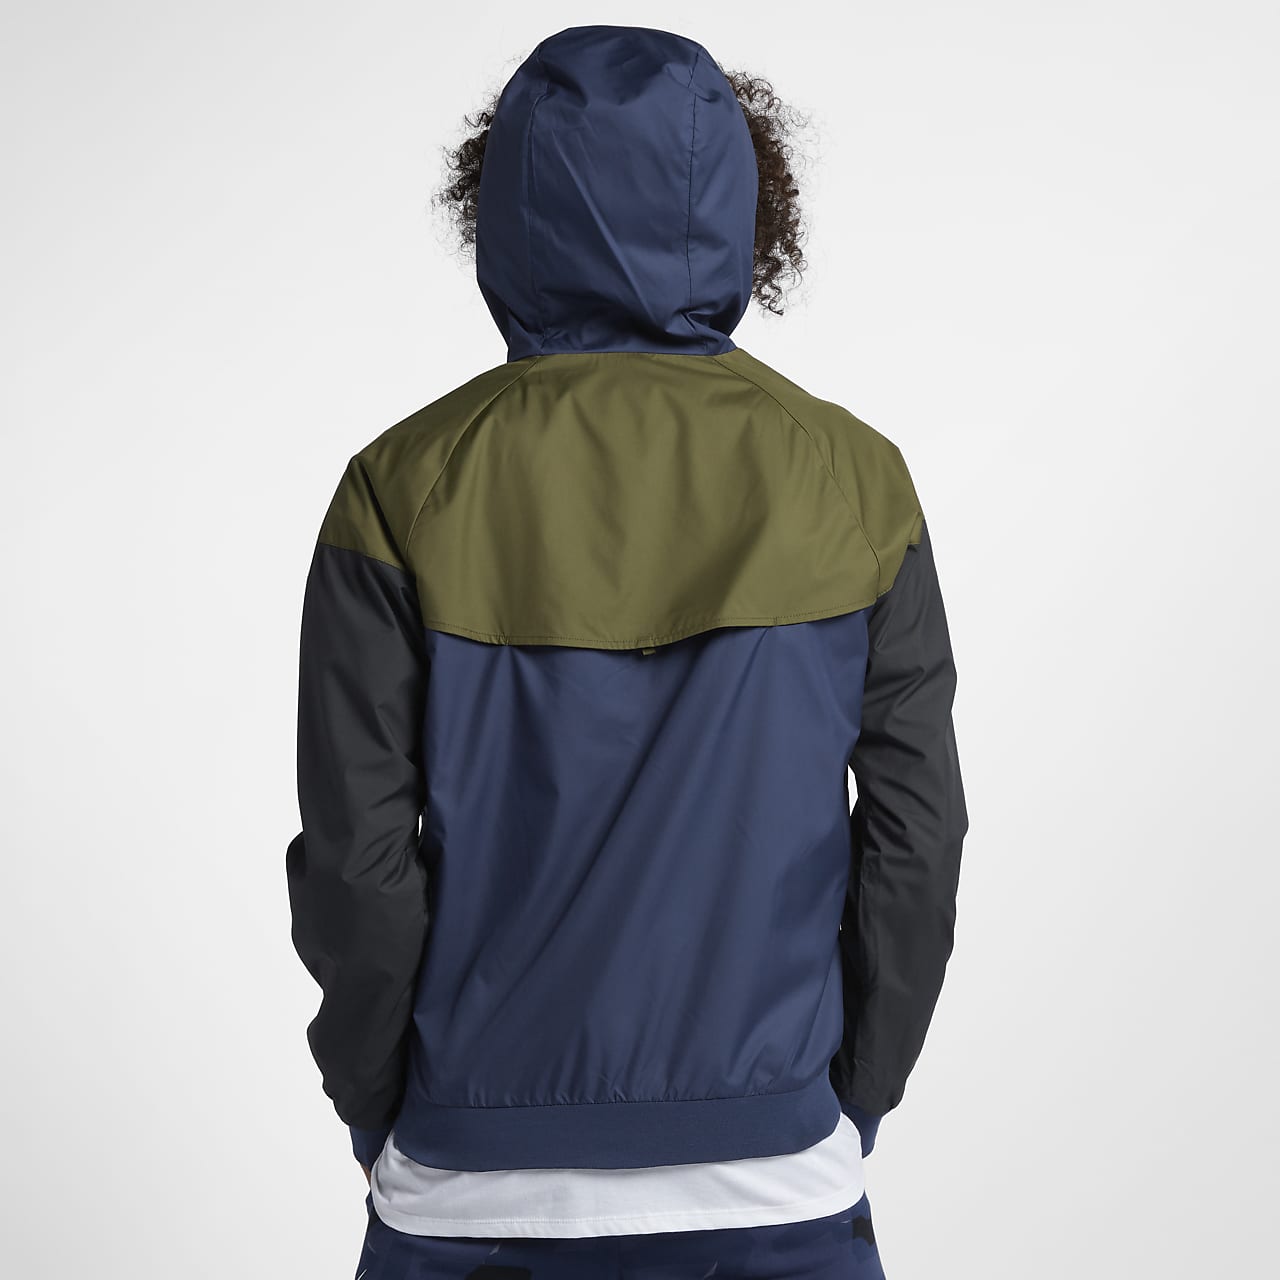 Jaket Windrunner Hot Sale, UP TO 65% OFF | www.aramanatural.es